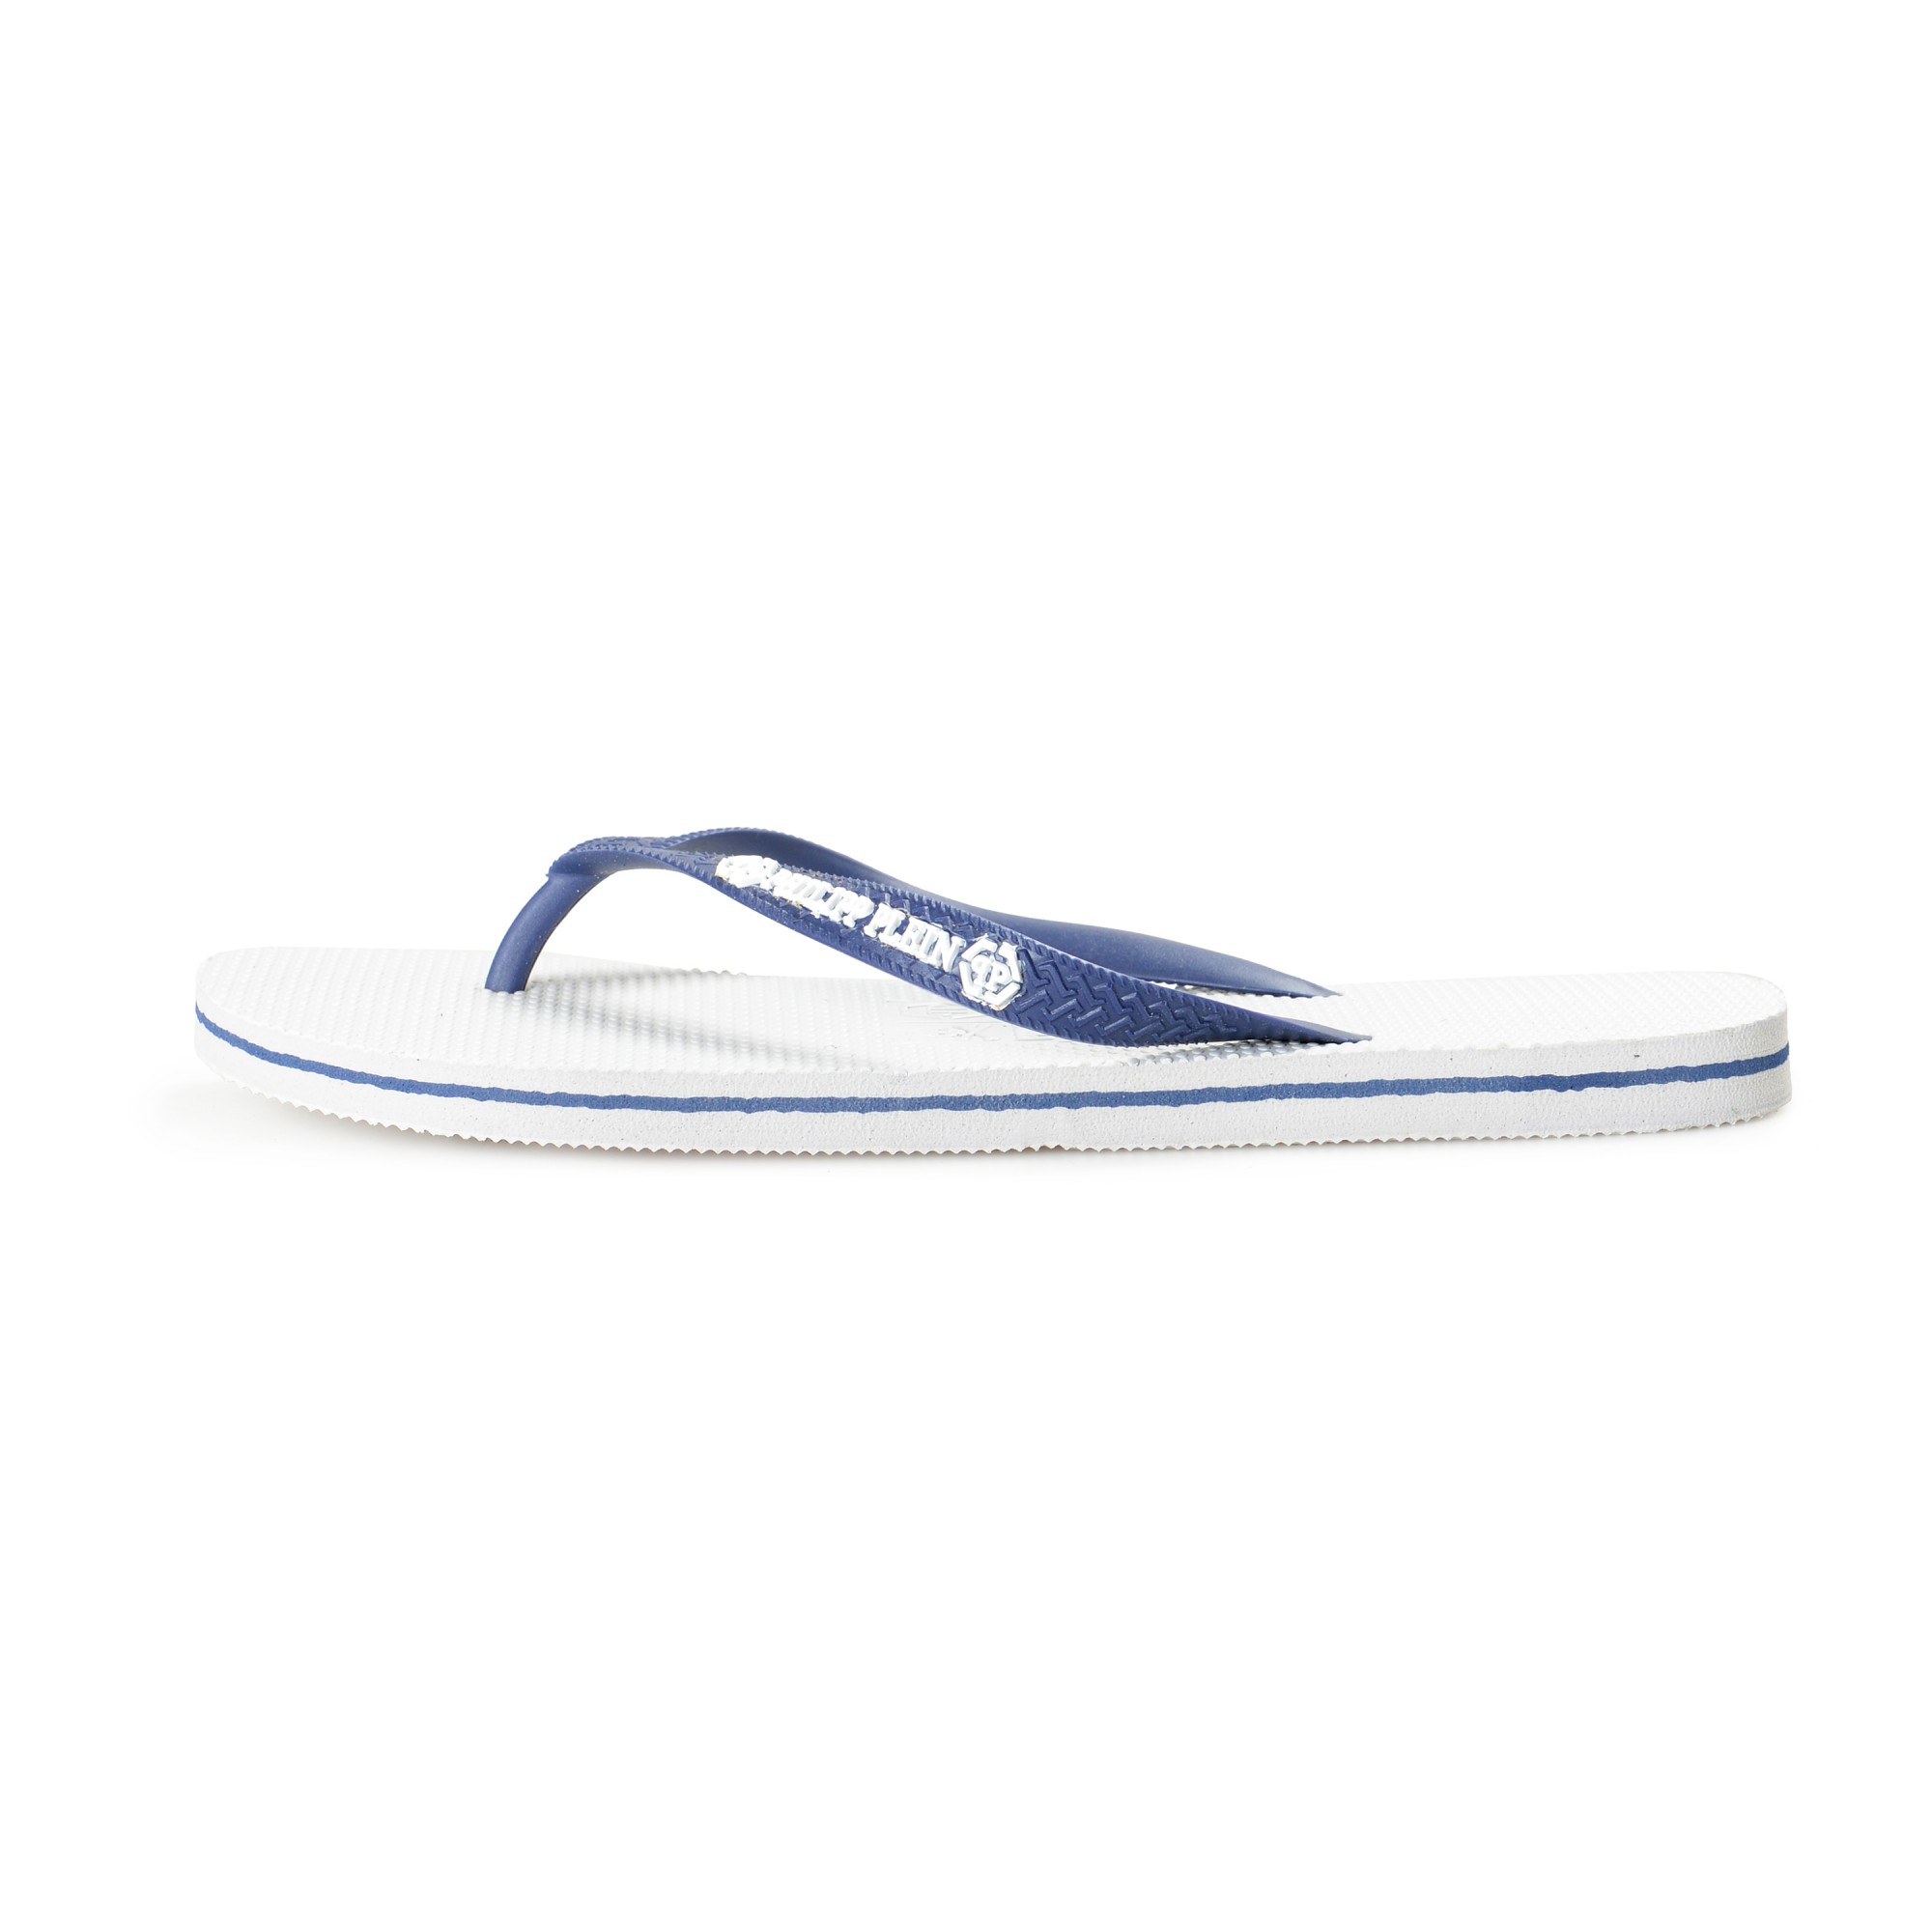 Womens Shoes Flats and flat shoes Sandals and flip-flops Giesswein Rubber Plein Flip Flops in Blue 